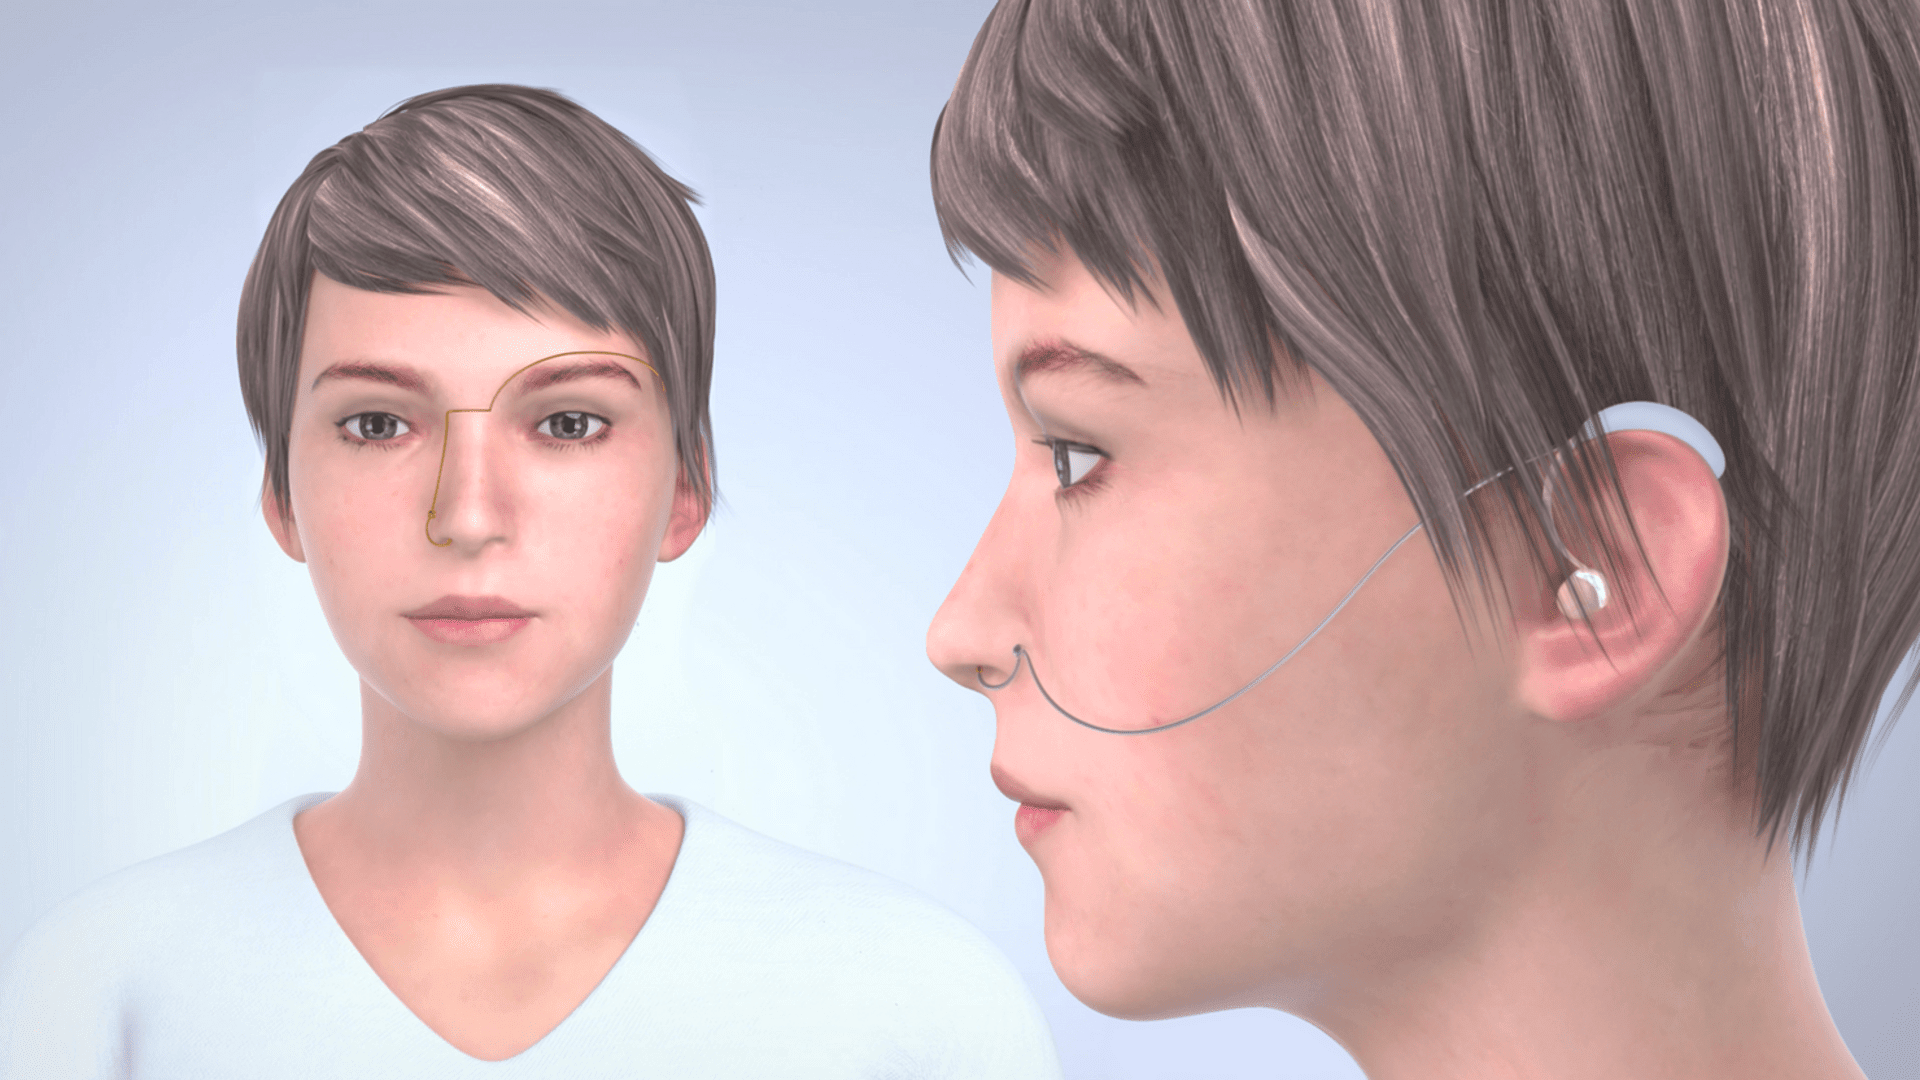 Image of what looks like a computer-generated woman’s head and shoulders on the left and in close-up profile on the right, with a wire running from her nostril to her ear.